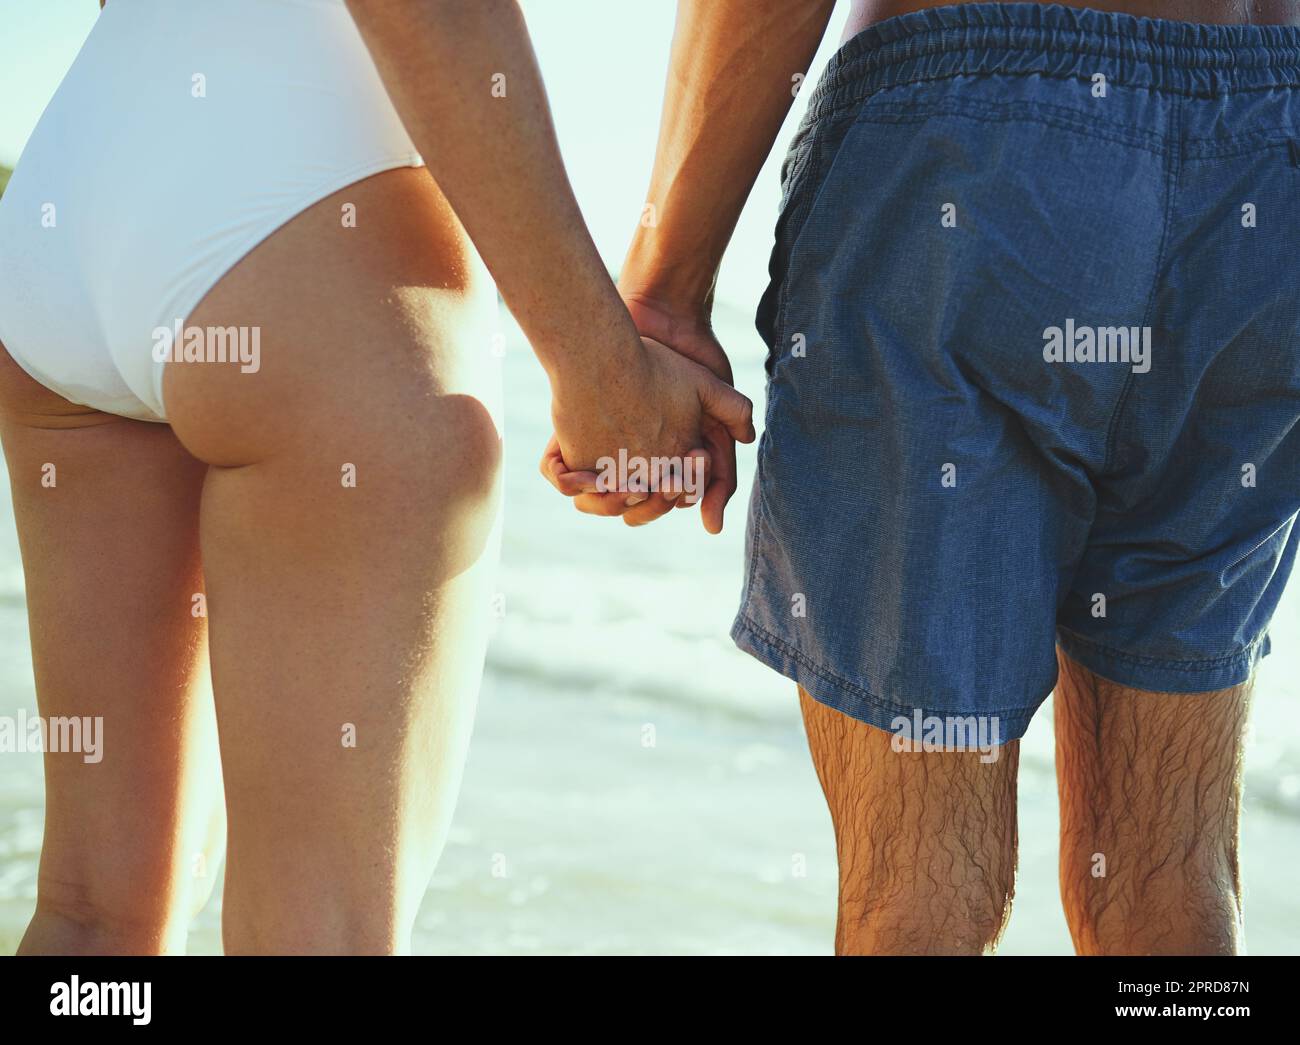 Summers the perfect setting for some romance. Closeup shot of a couple holding hands at the beach. Stock Photo